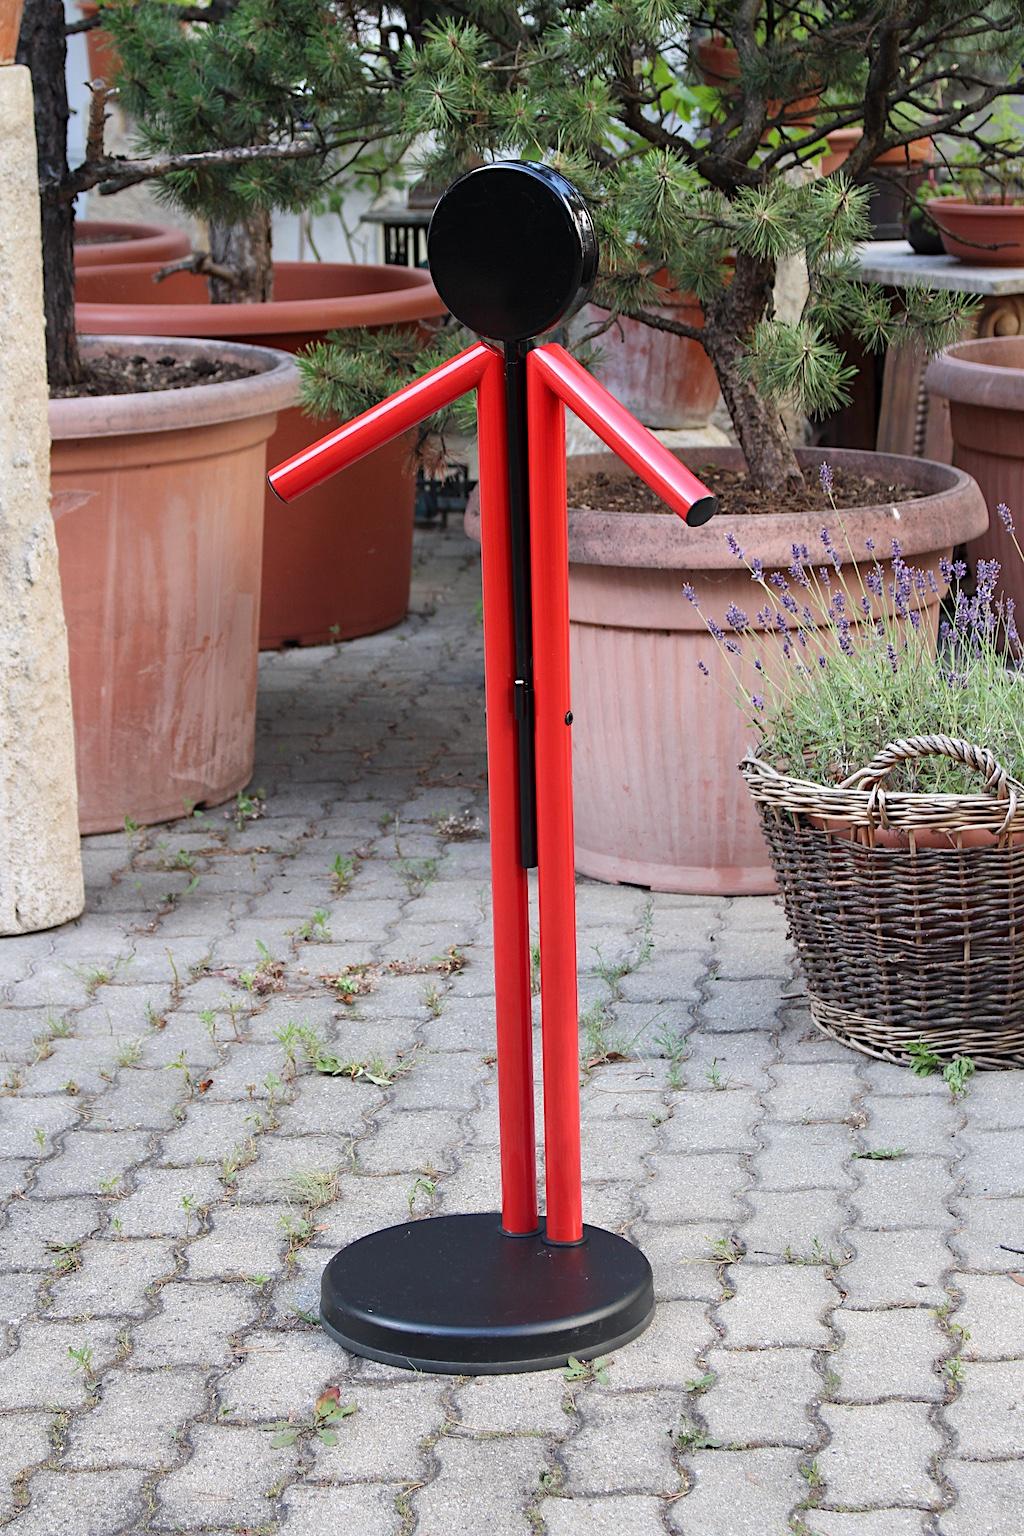 Modern Memphis style vintage red and black metal valet, which was designed and manufactured in Italy, 1980s.
While two red lacquered tubes features the hooks for your clothing and jacket, a black fold out tray takes your accessories. The extended